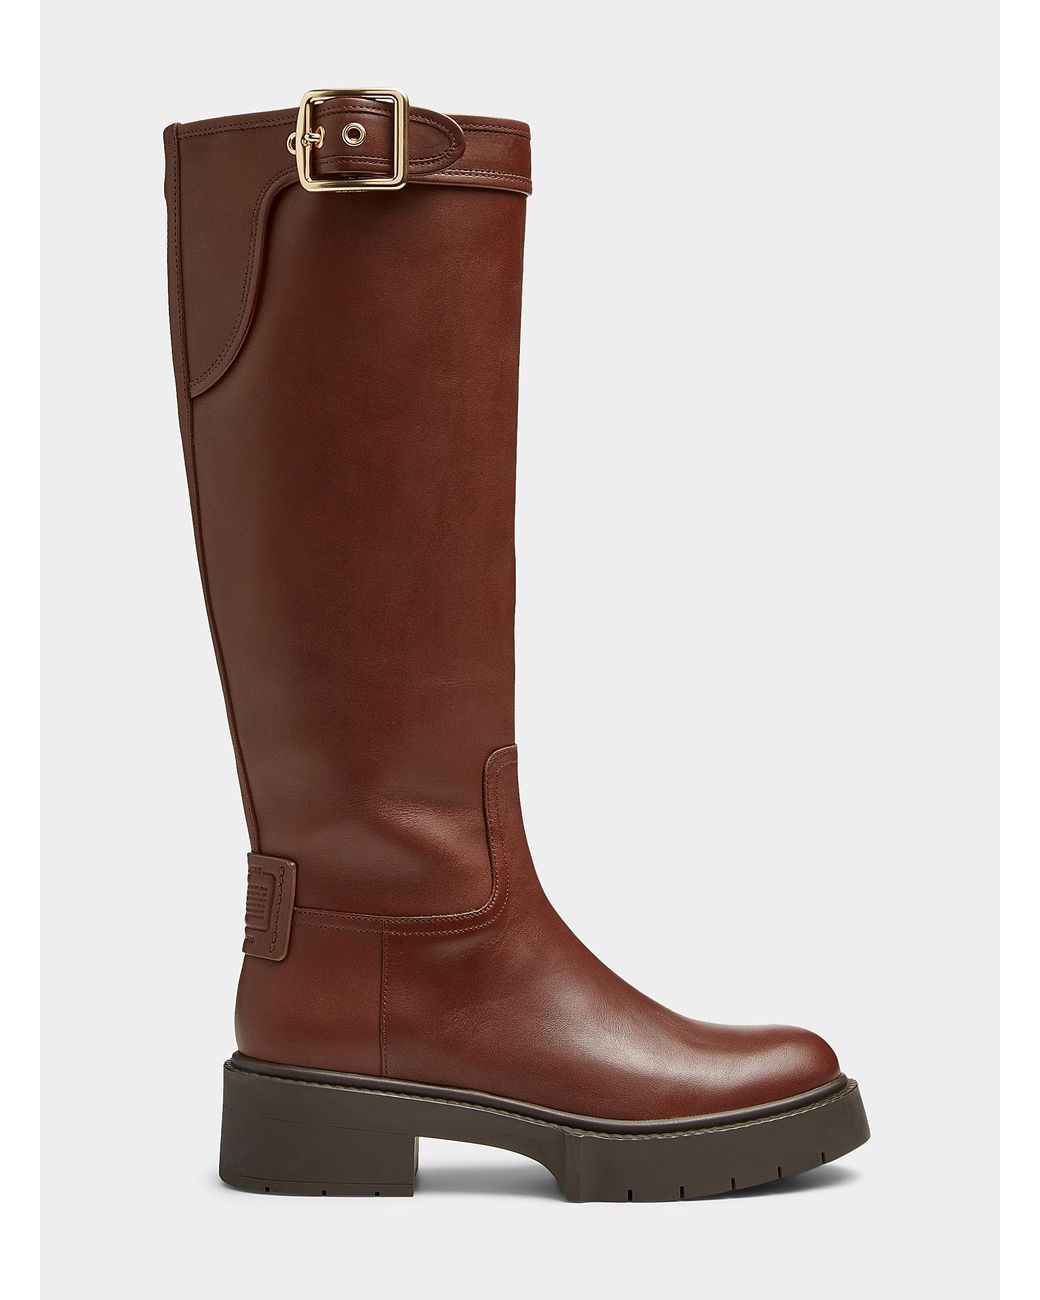 COACH Lilli Leather Riding Boots Women in Brown | Lyst